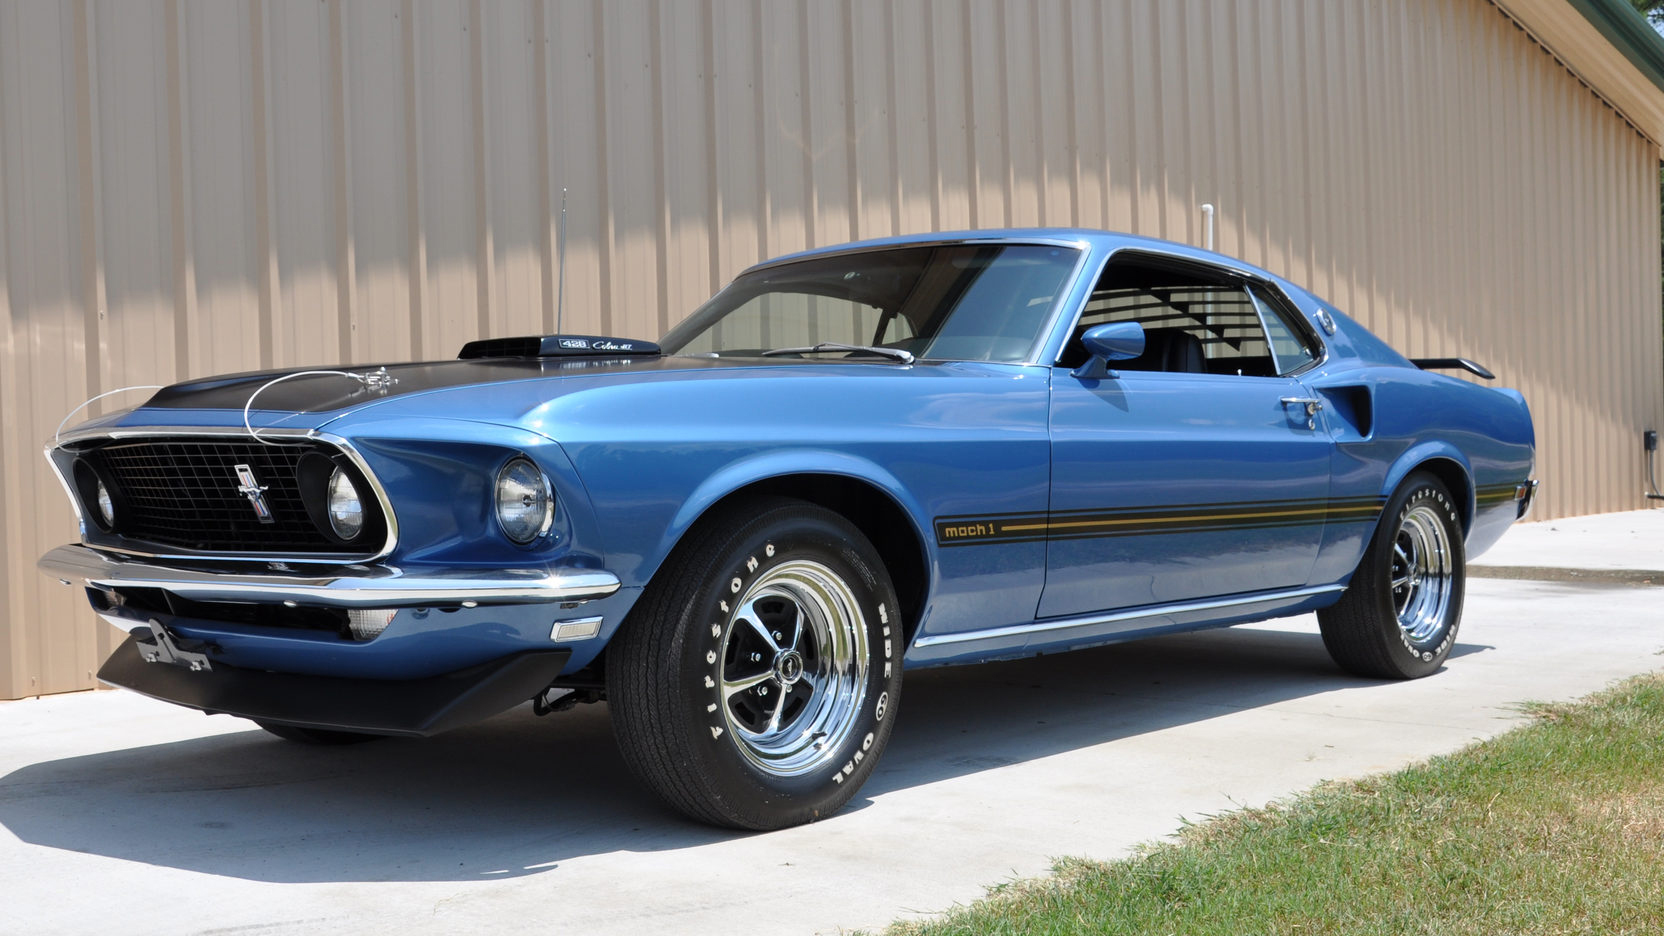 Mailbag: Budget Performance 351W Upgrades for a 1969 Ford Mustang Mach